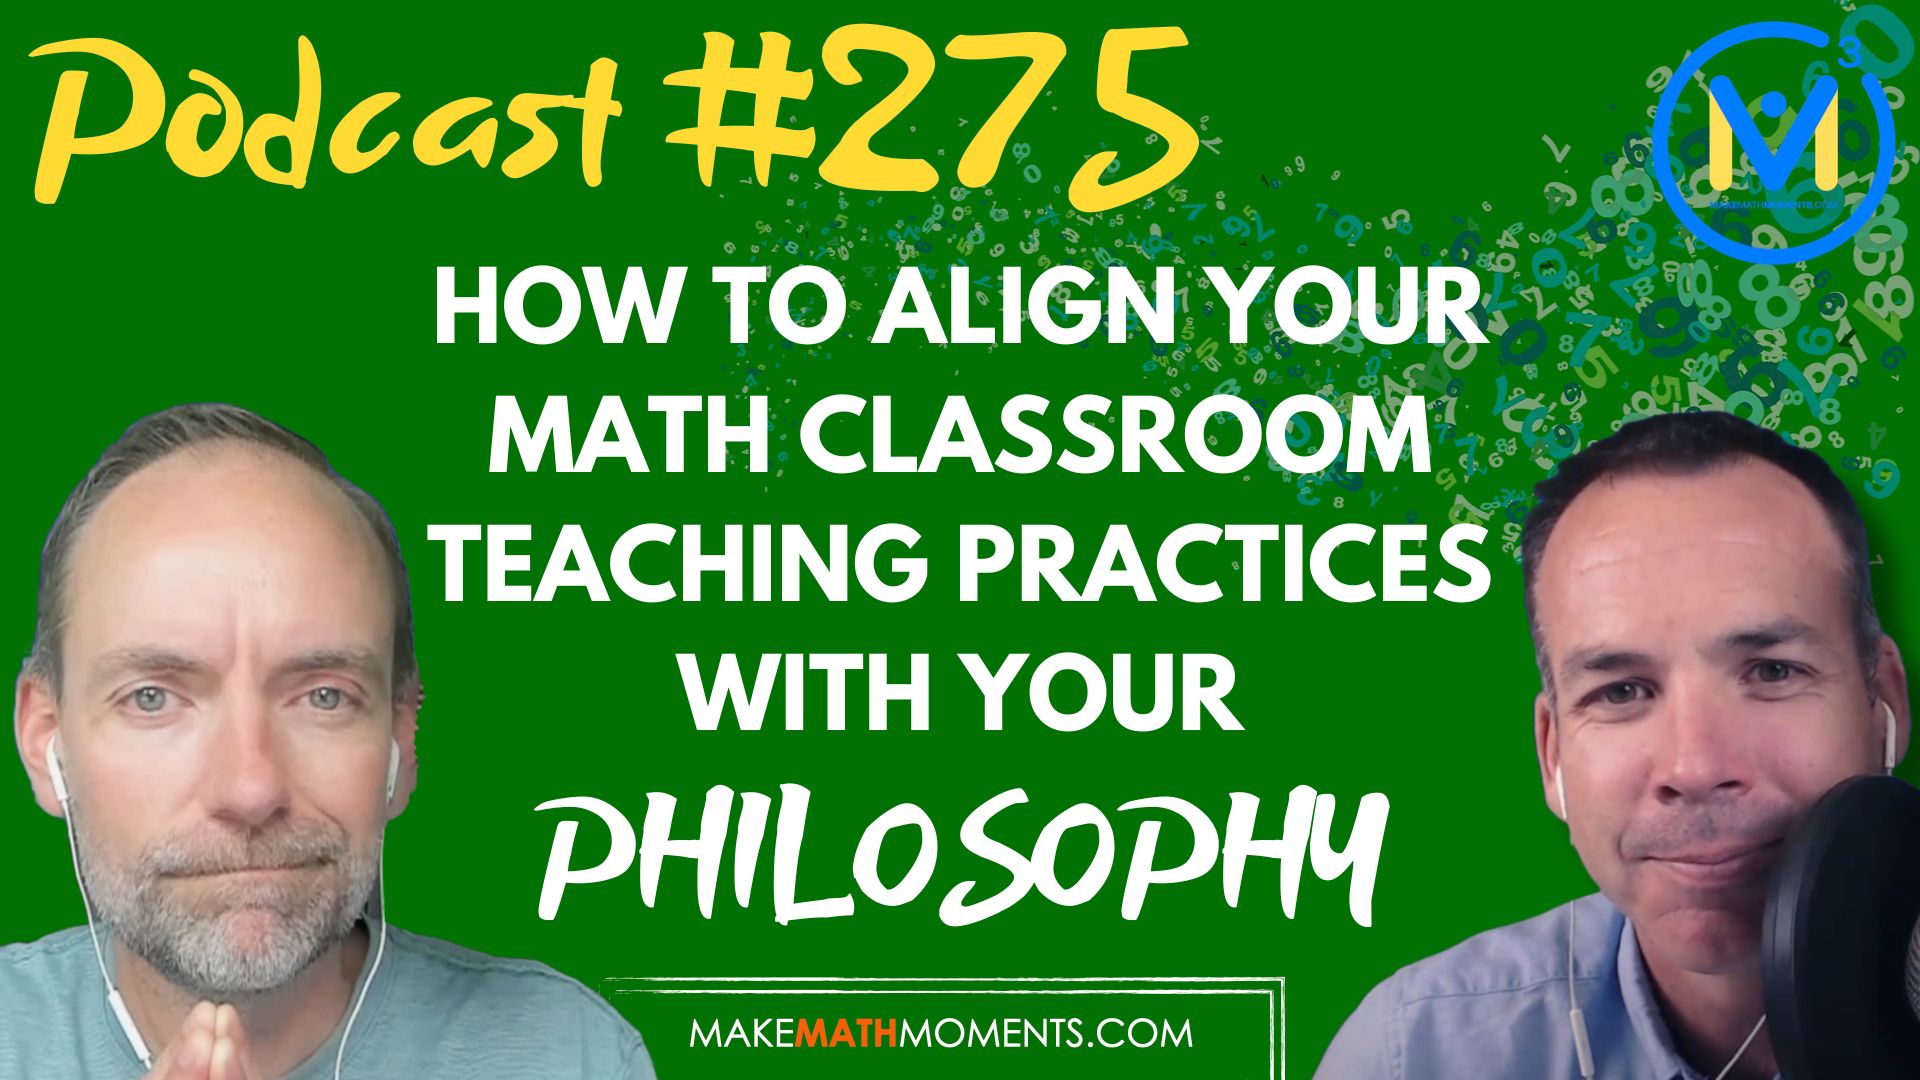 Episode #275: How To Align Your Math Classroom Teaching Practices With Your Philosophy – A Math Mentoring Moment